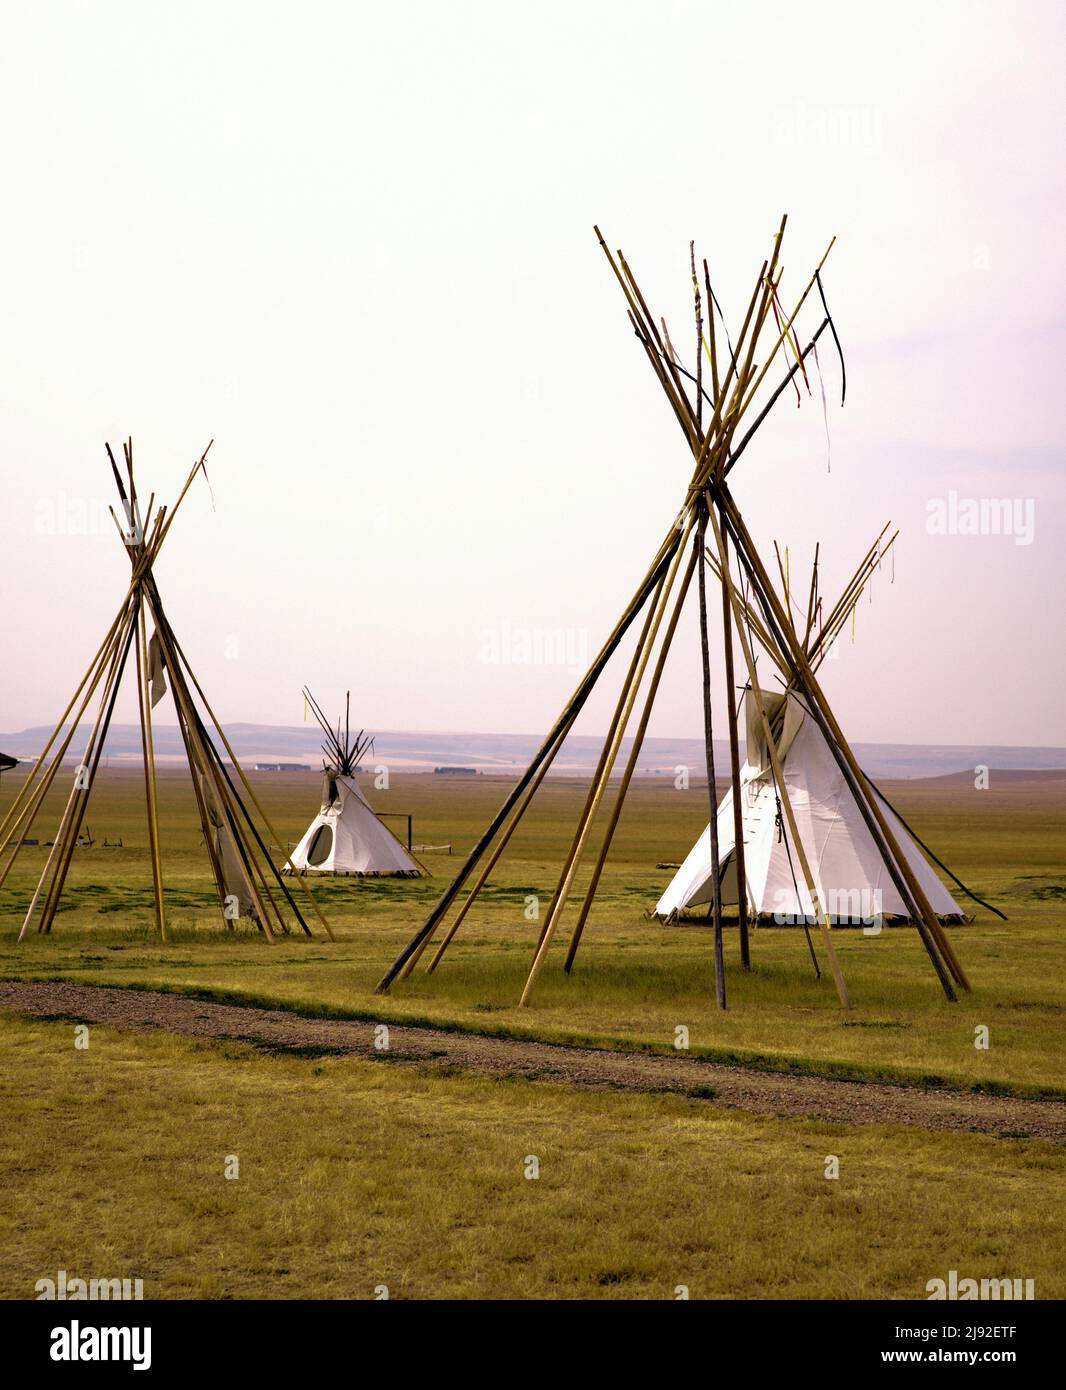 Teepee poles form the structures for indigenous living quarters, with two dwellings already covered in canvas. Stock Photo